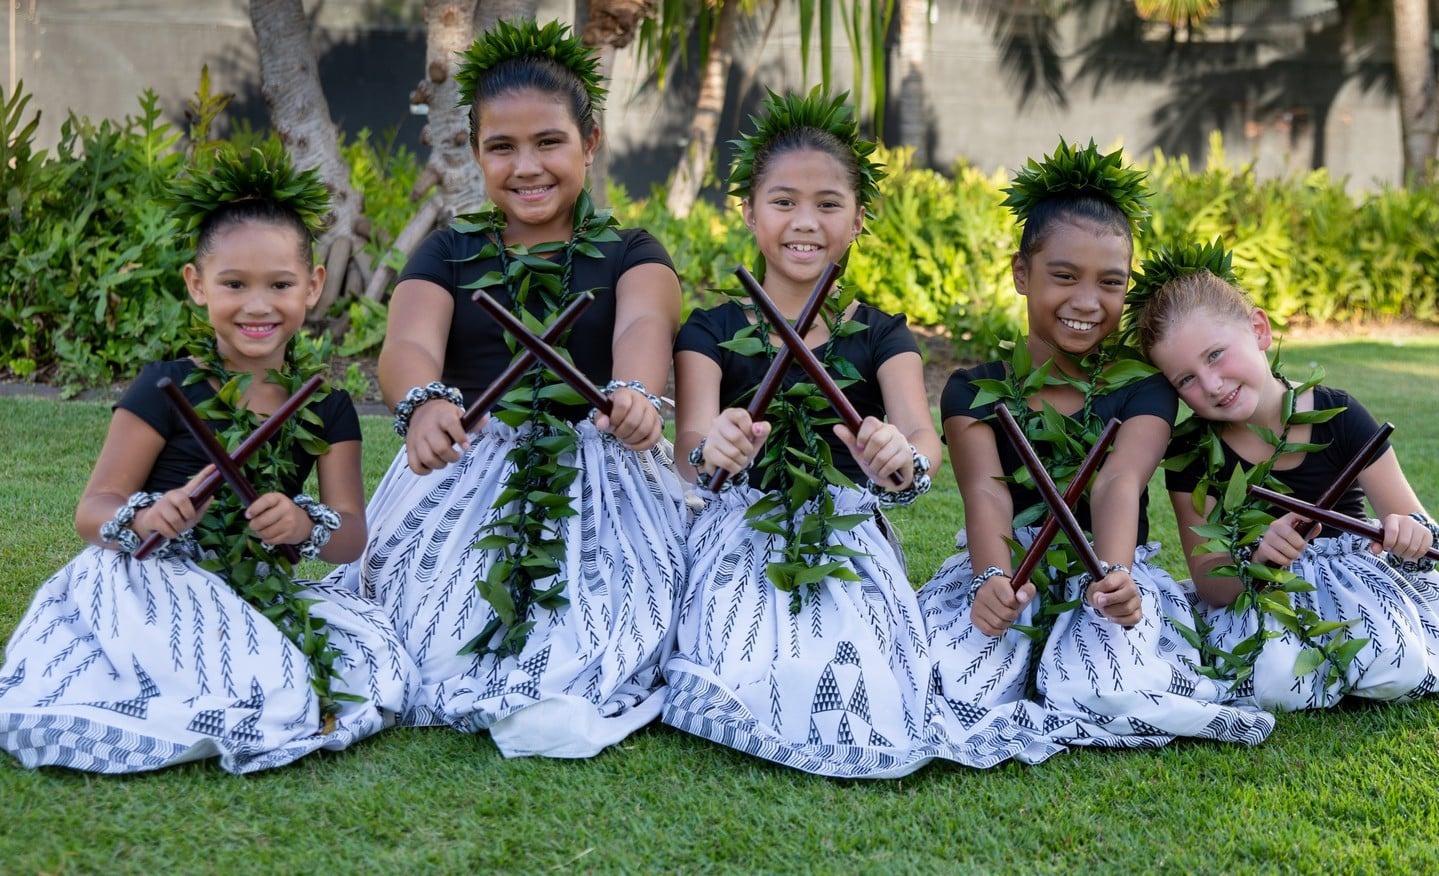 We are thrilled to announce the return of Kona Nui Nights! Join us Wednesday, August 10 from 6pm-8pm at Victoria Ward Park and enjoy live music by @hoku_zuttermeister_music and Kawaikapuokalani Hewett and a celebration of hula from Hālau Hula ‘O Puka’ikapuaokalani, Kumu hula Darcy Moniz. Bring a blanket, chair and a picnic, or purchase food and drink from one of our neighborhood eateries, and enjoy an evening in the park. Click the link in bio to learn more! #wardvillage #hawaii #oahu #hawaiianculture